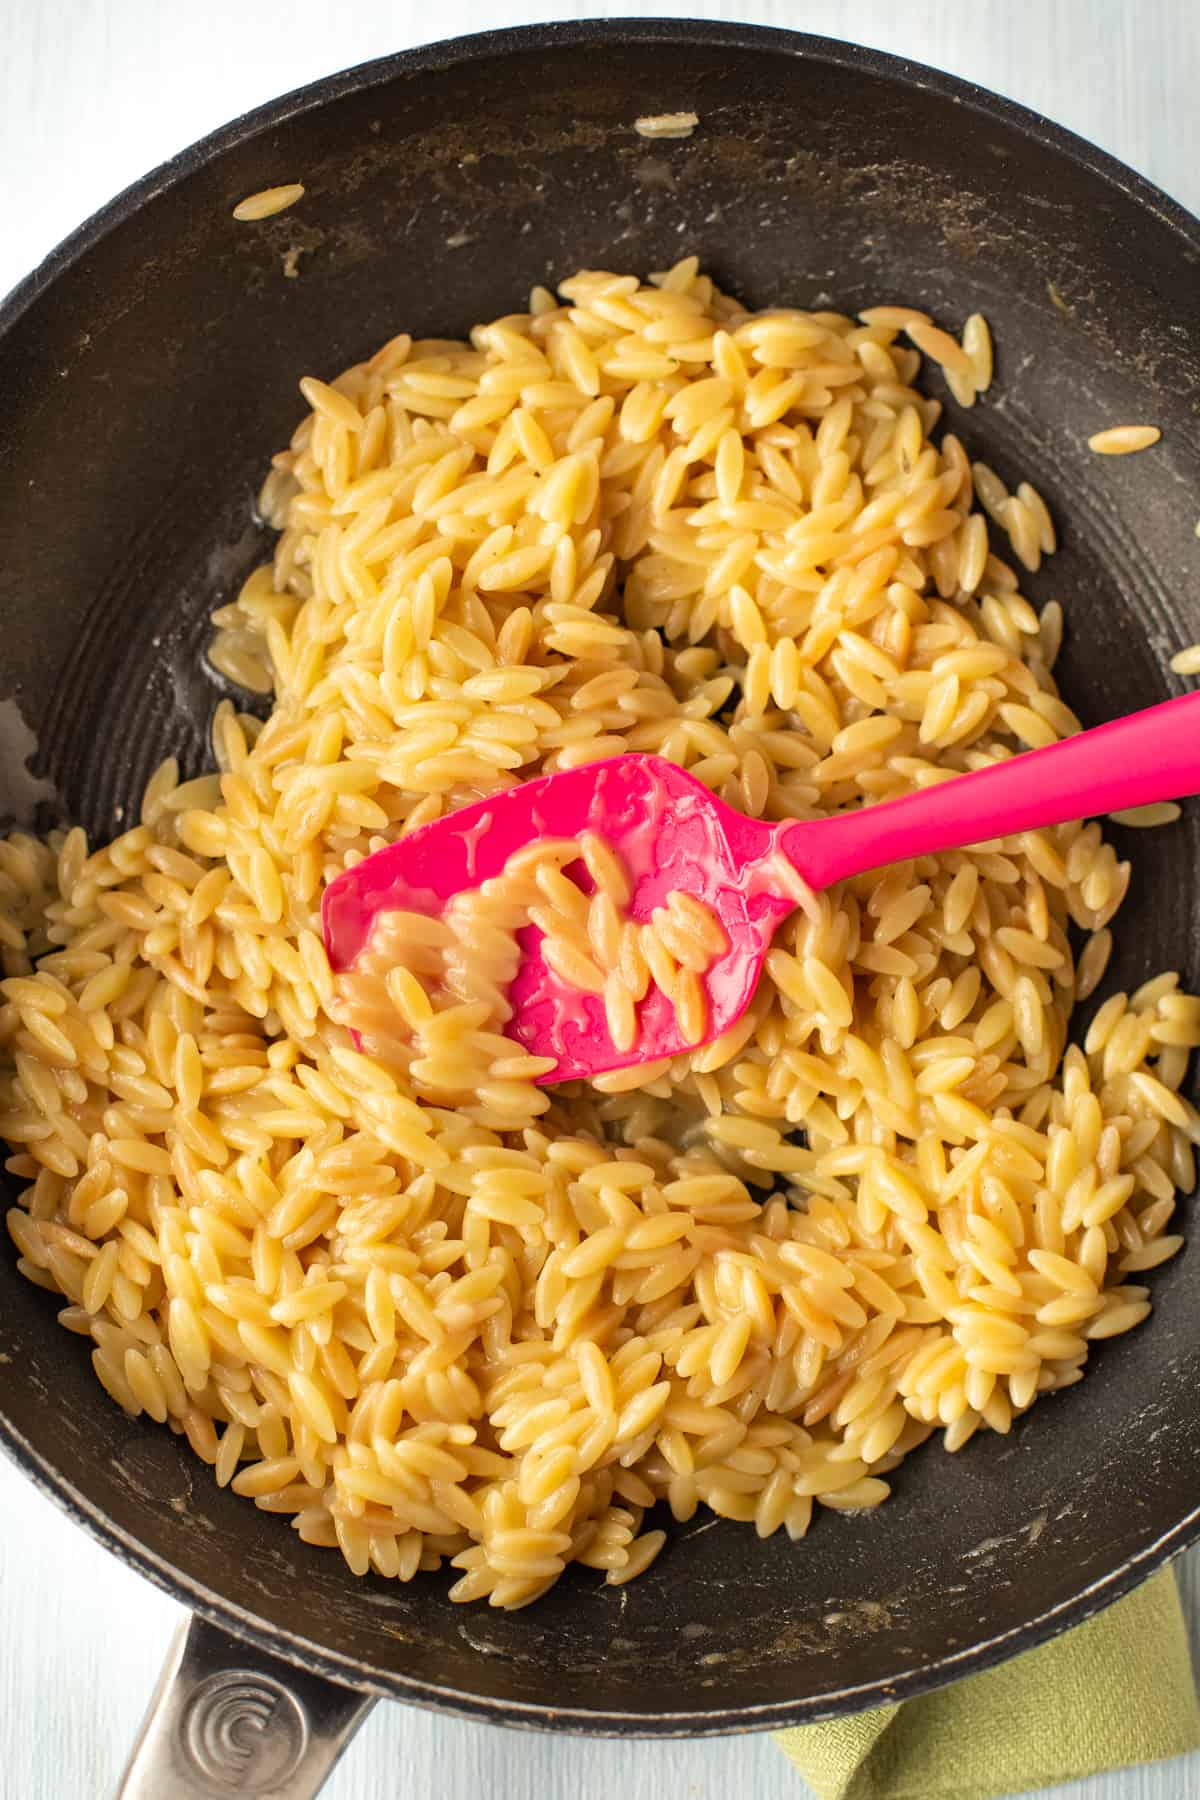 Creamy orzo risotto in a pan.